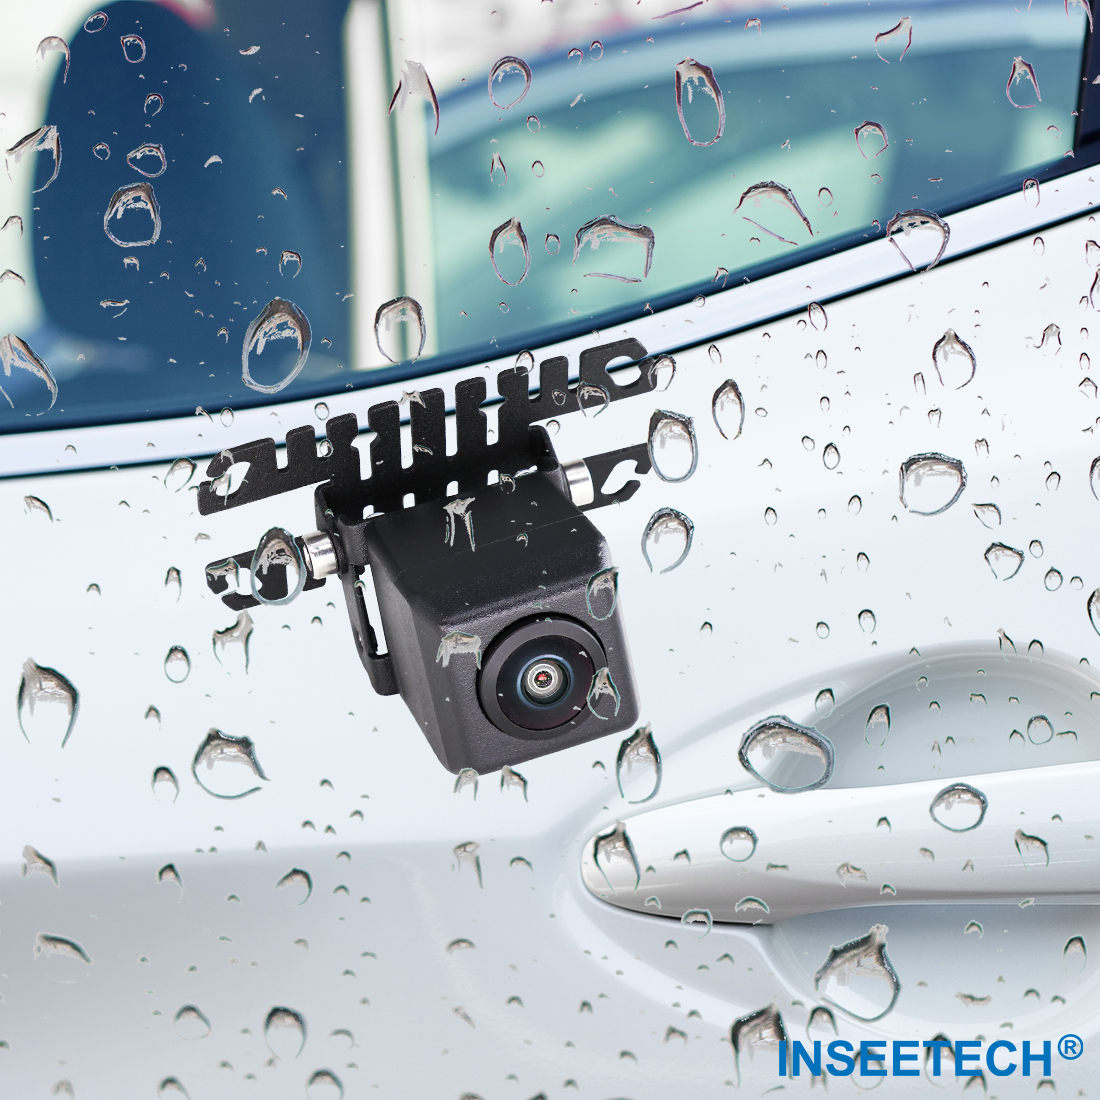 Stay protected in extreme weather conditions with our IP69k waterproof rear view camera. Whether it's rain, snow, or wind, our camera is designed to work in any weather, keeping you safe on the road.